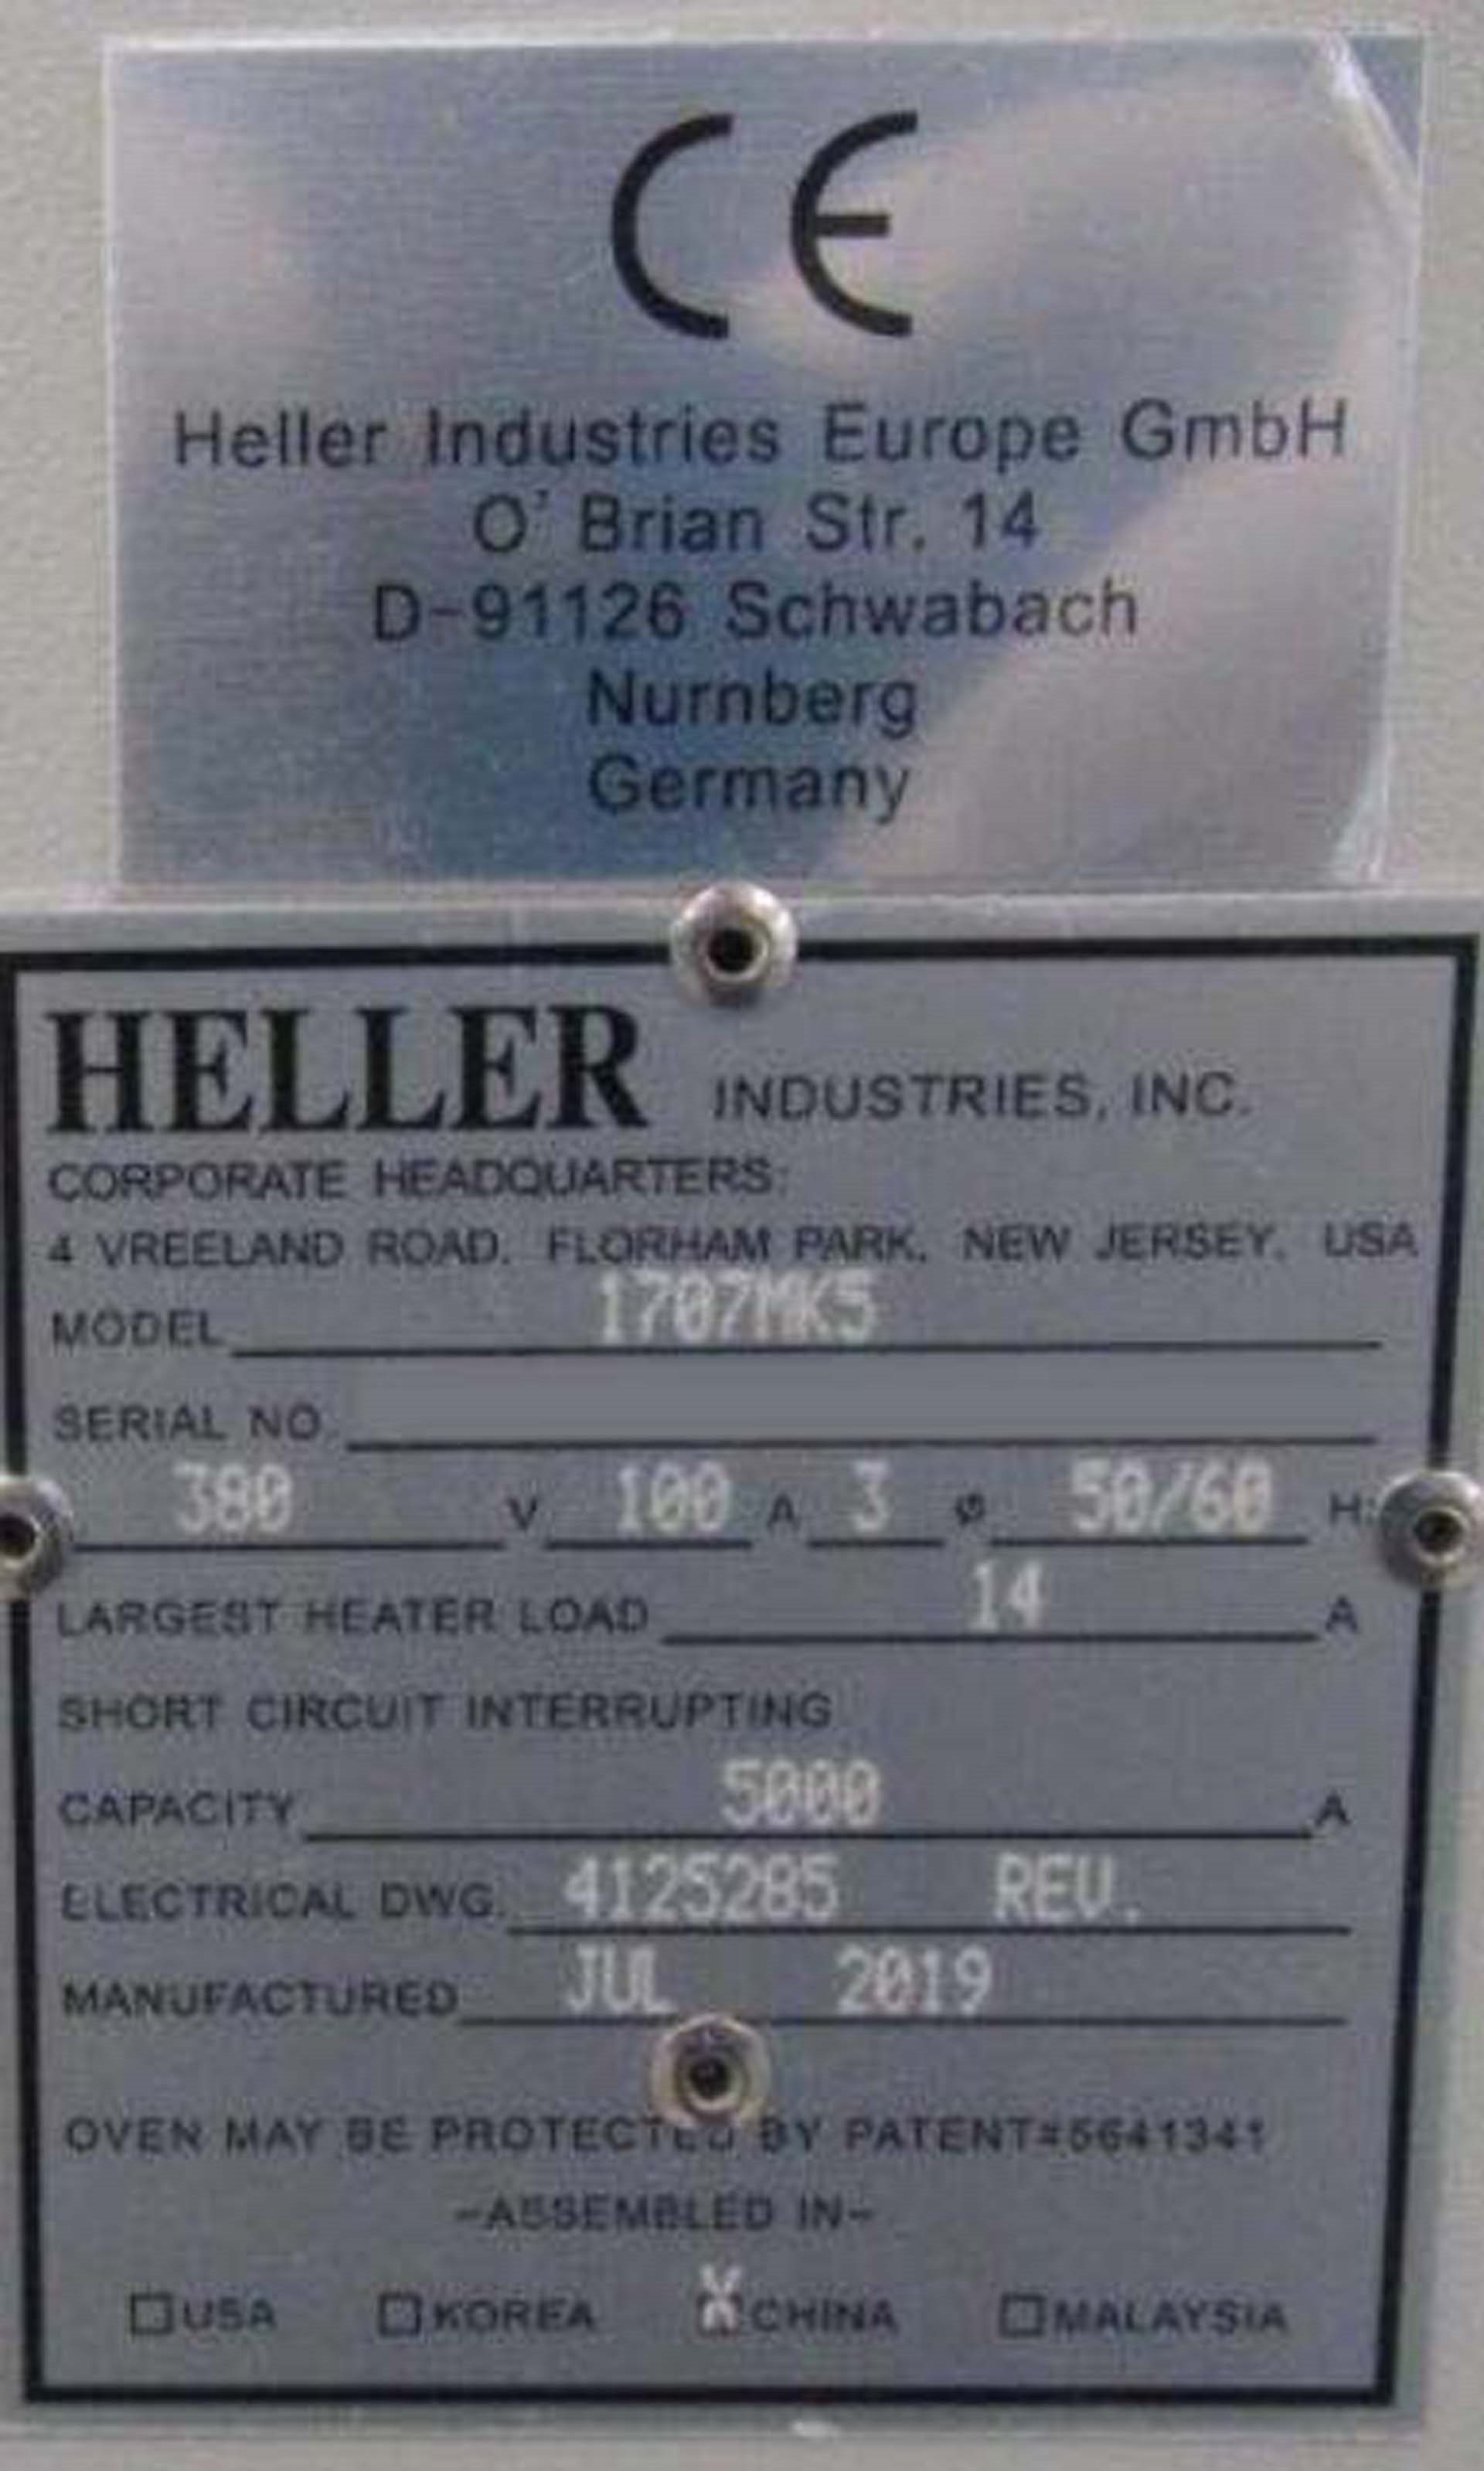 Photo Used HELLER 1707 MK5 For Sale